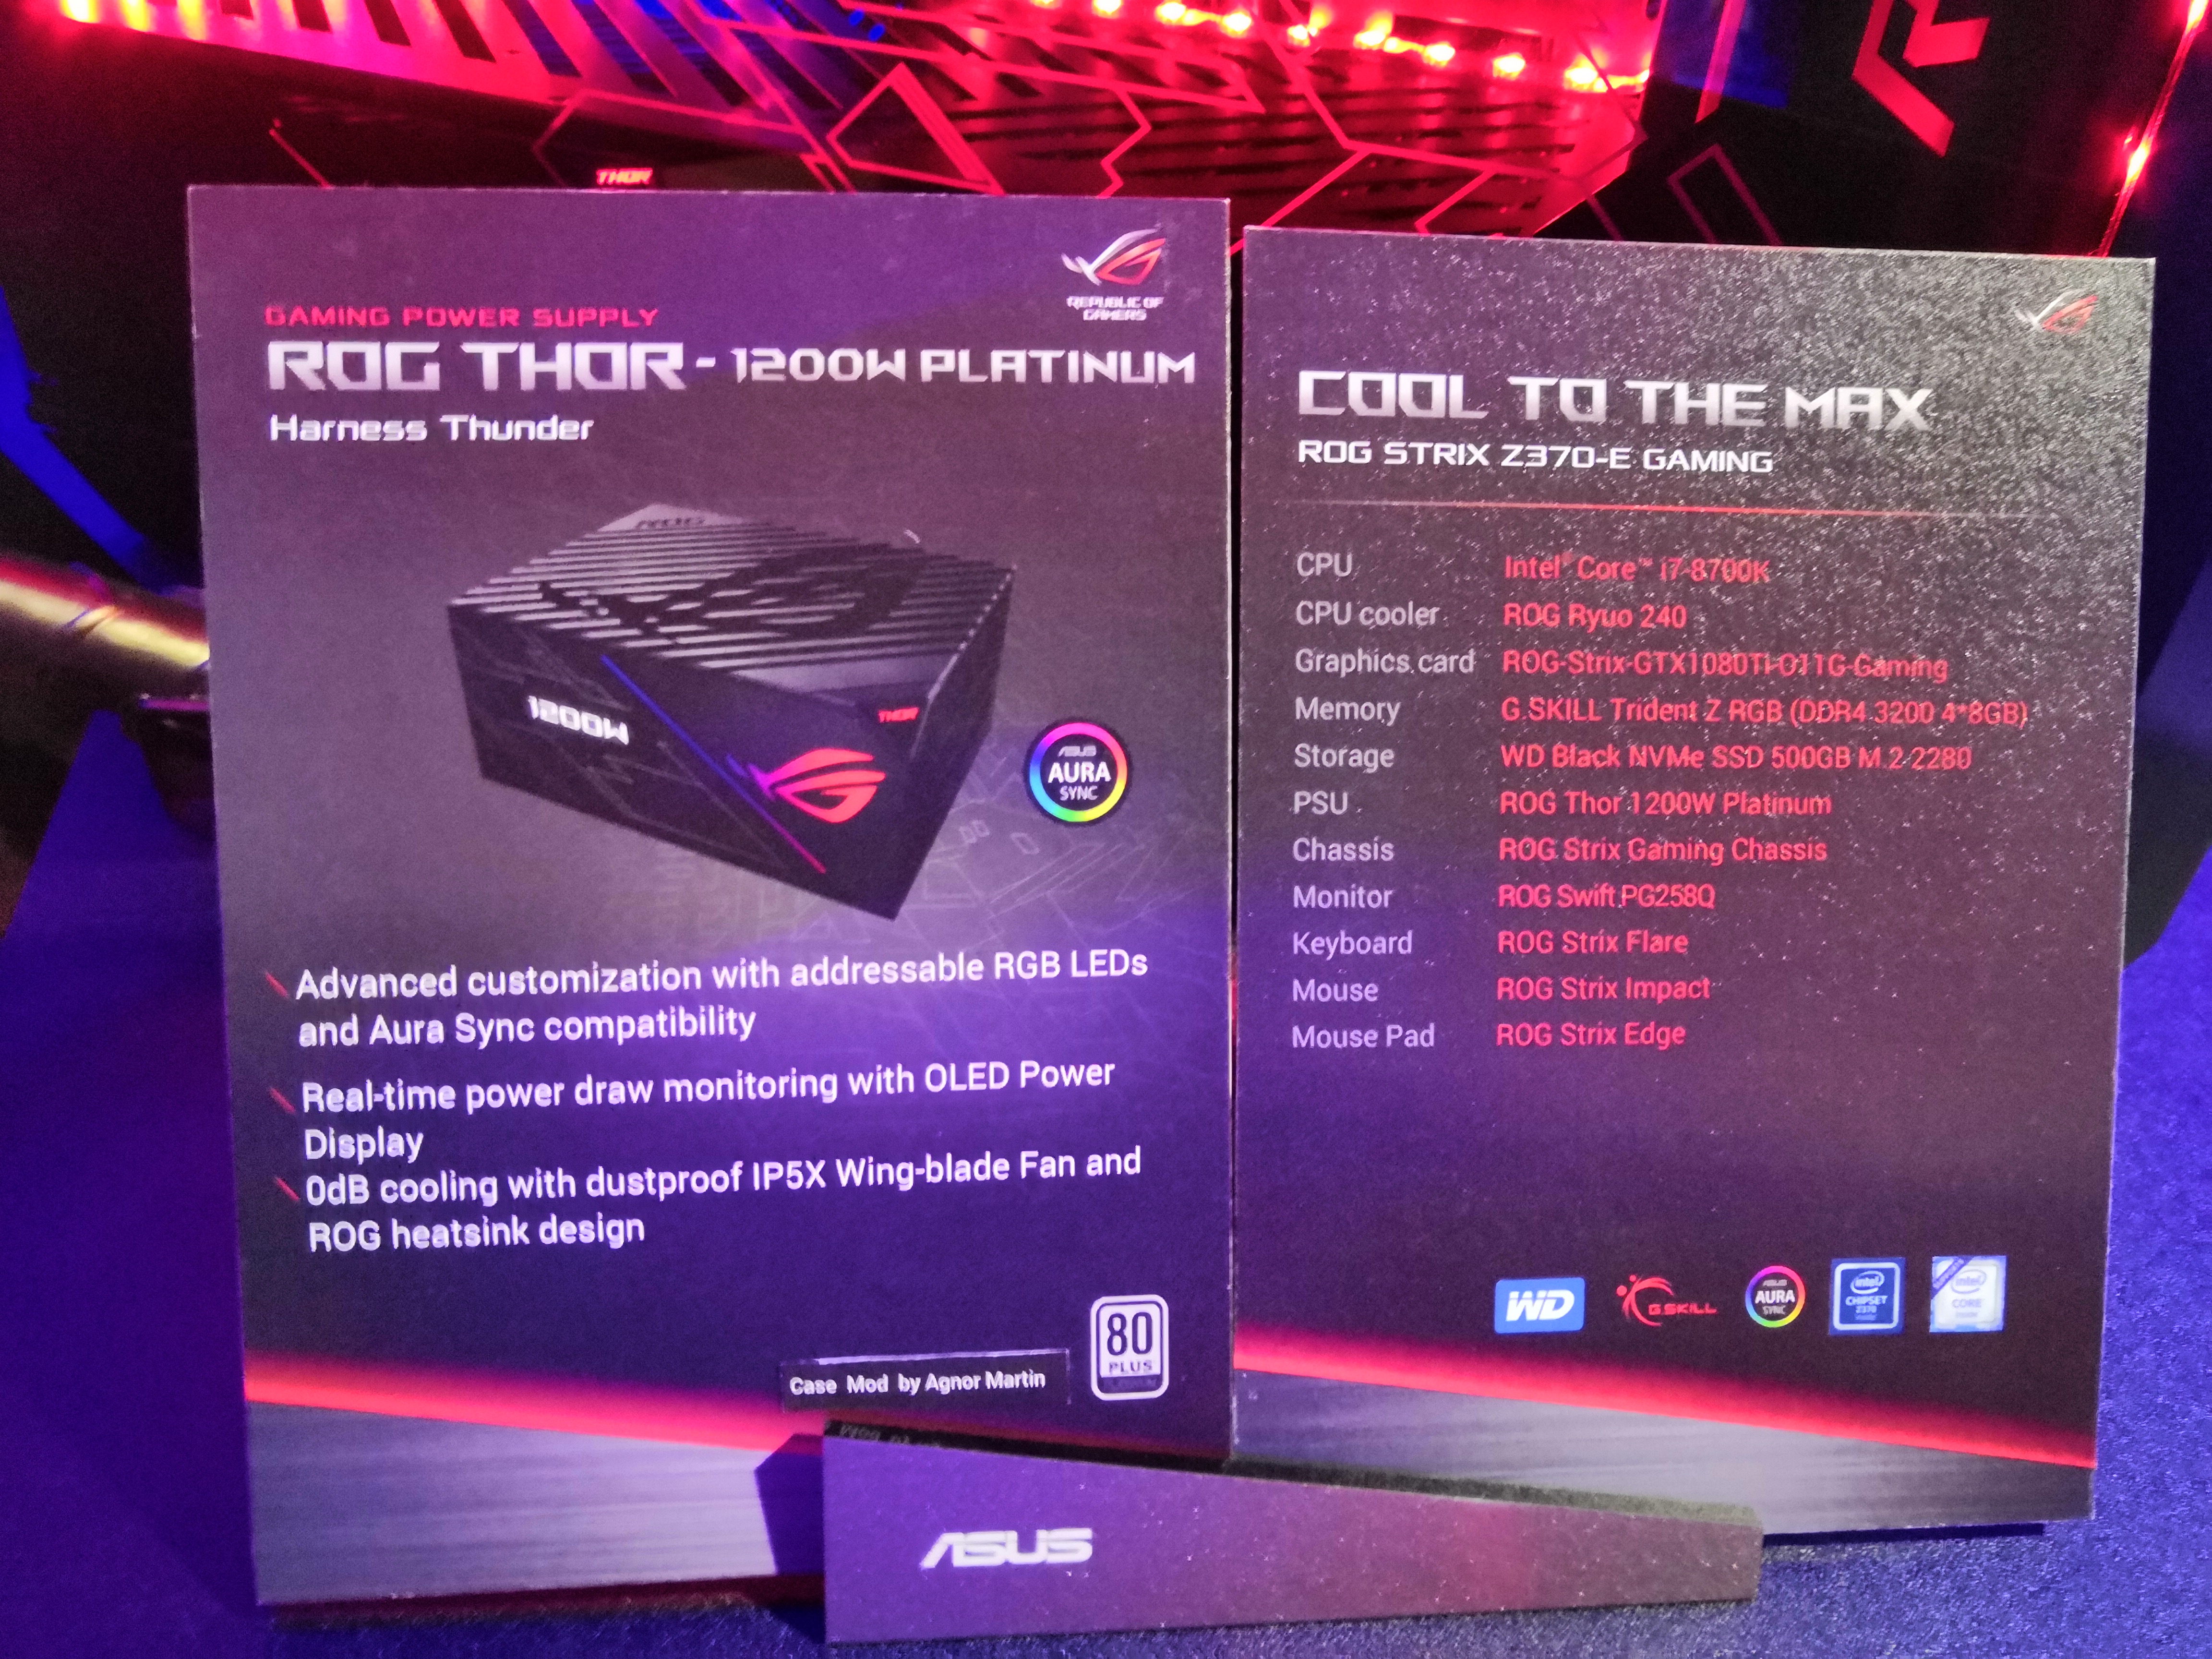 ASUS ROG Goes For Power Supplies: ROG Thor 1200W Platinum